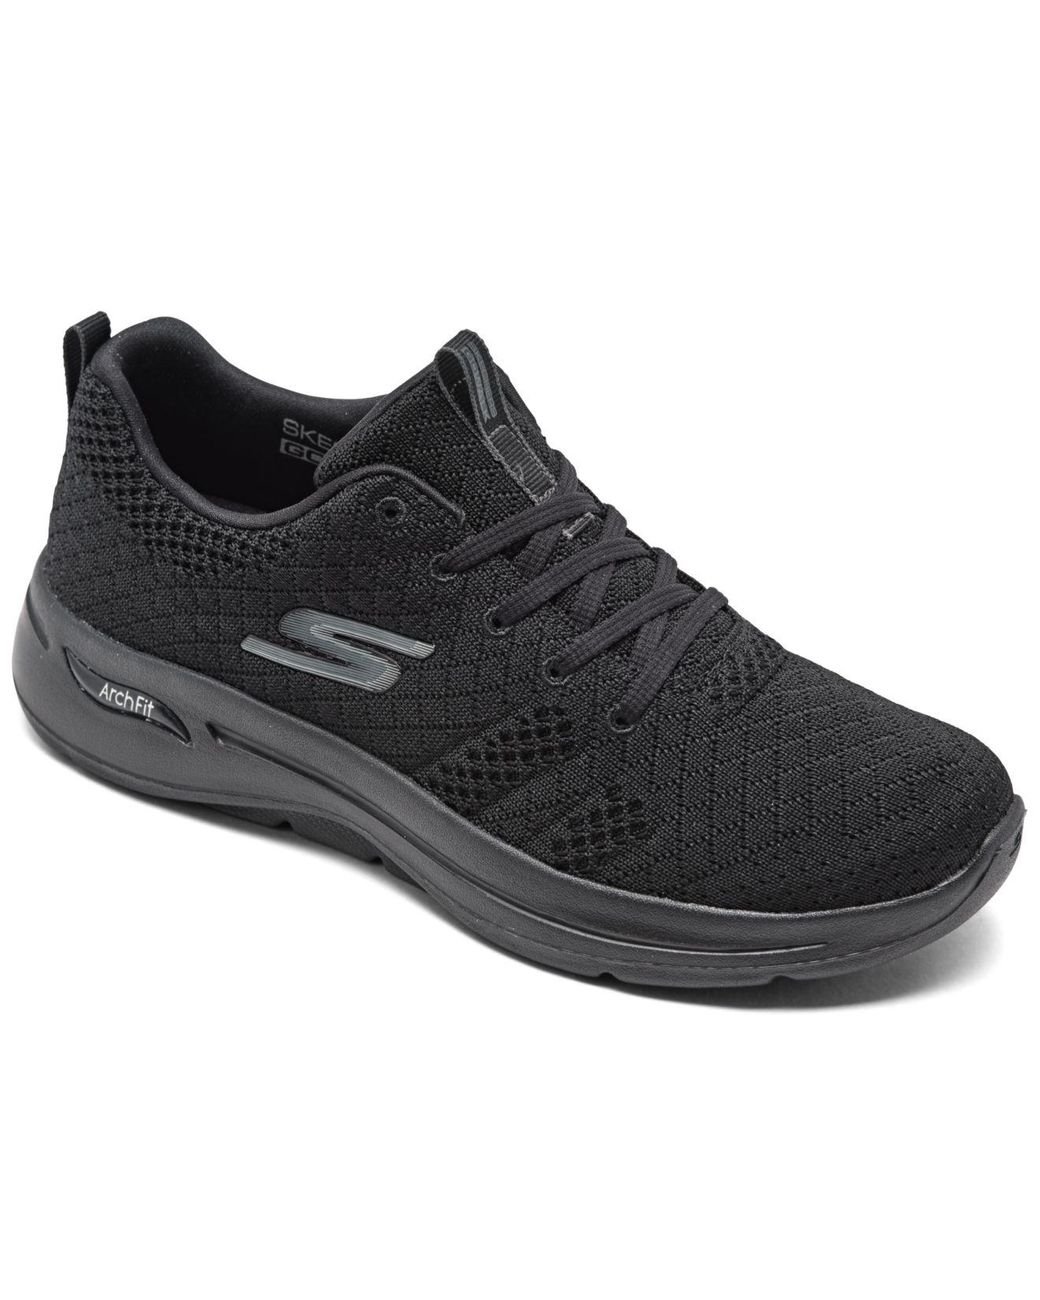 Skechers Synthetic Go Walk - Arch Fit Unify Arch Support Walking ...